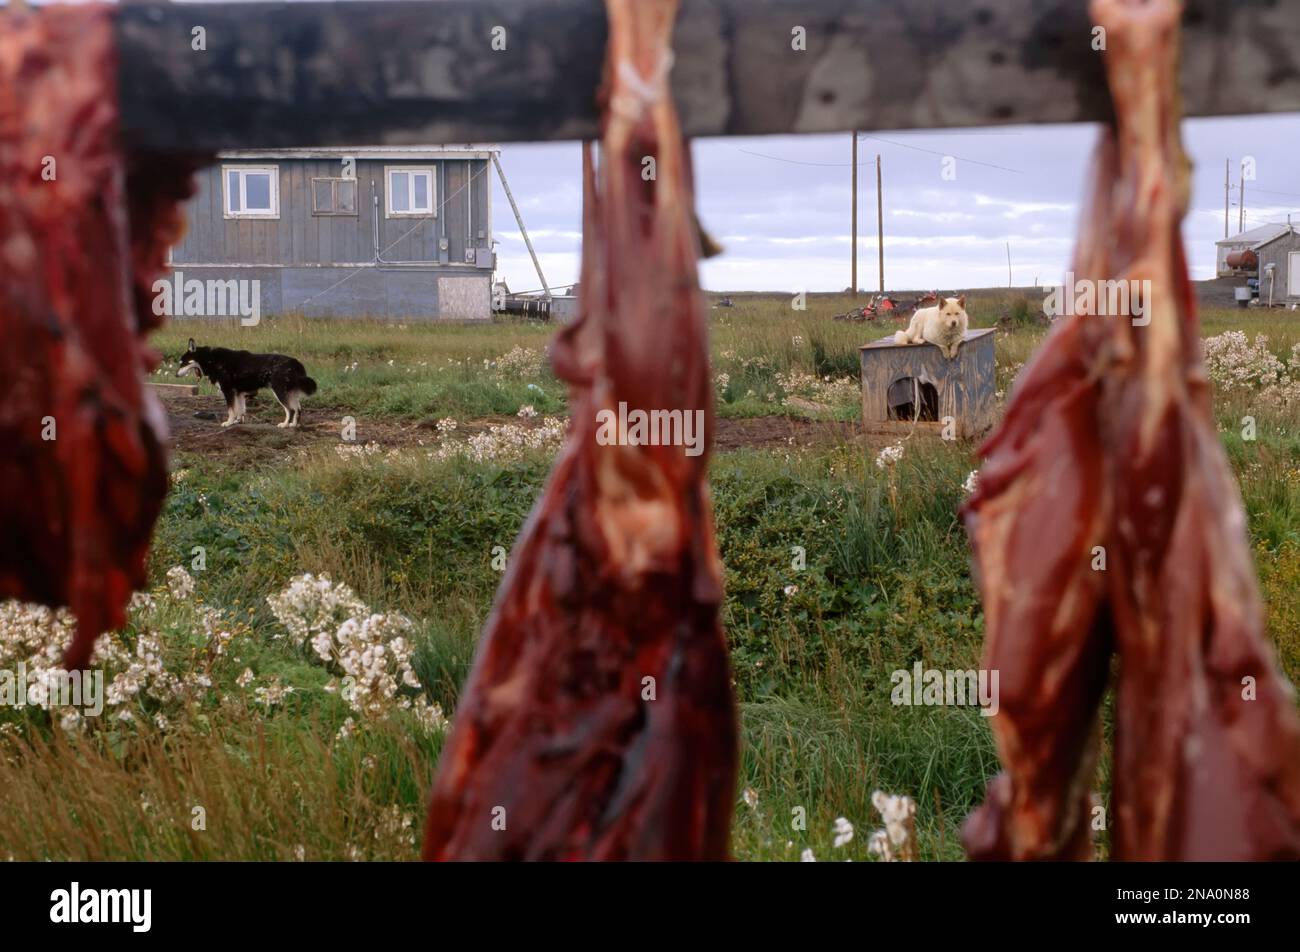 Meat curing outside at an Inuit settlement; North Slope, Alaska, United States of America Stock Photo